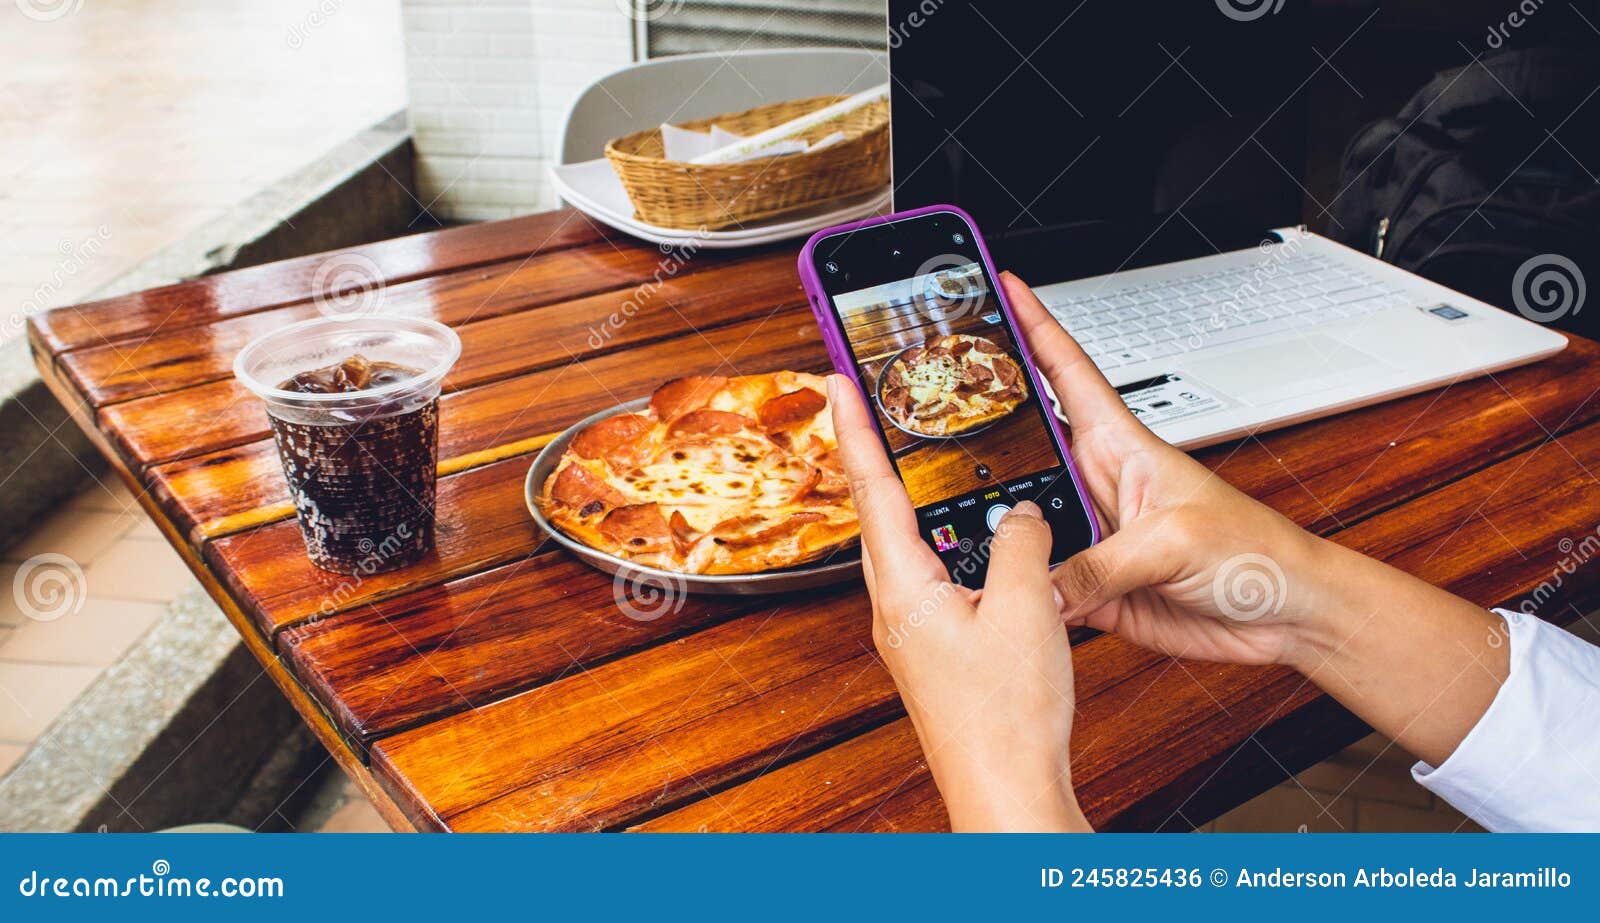 hand of person with mobile photographing food to publish on networks